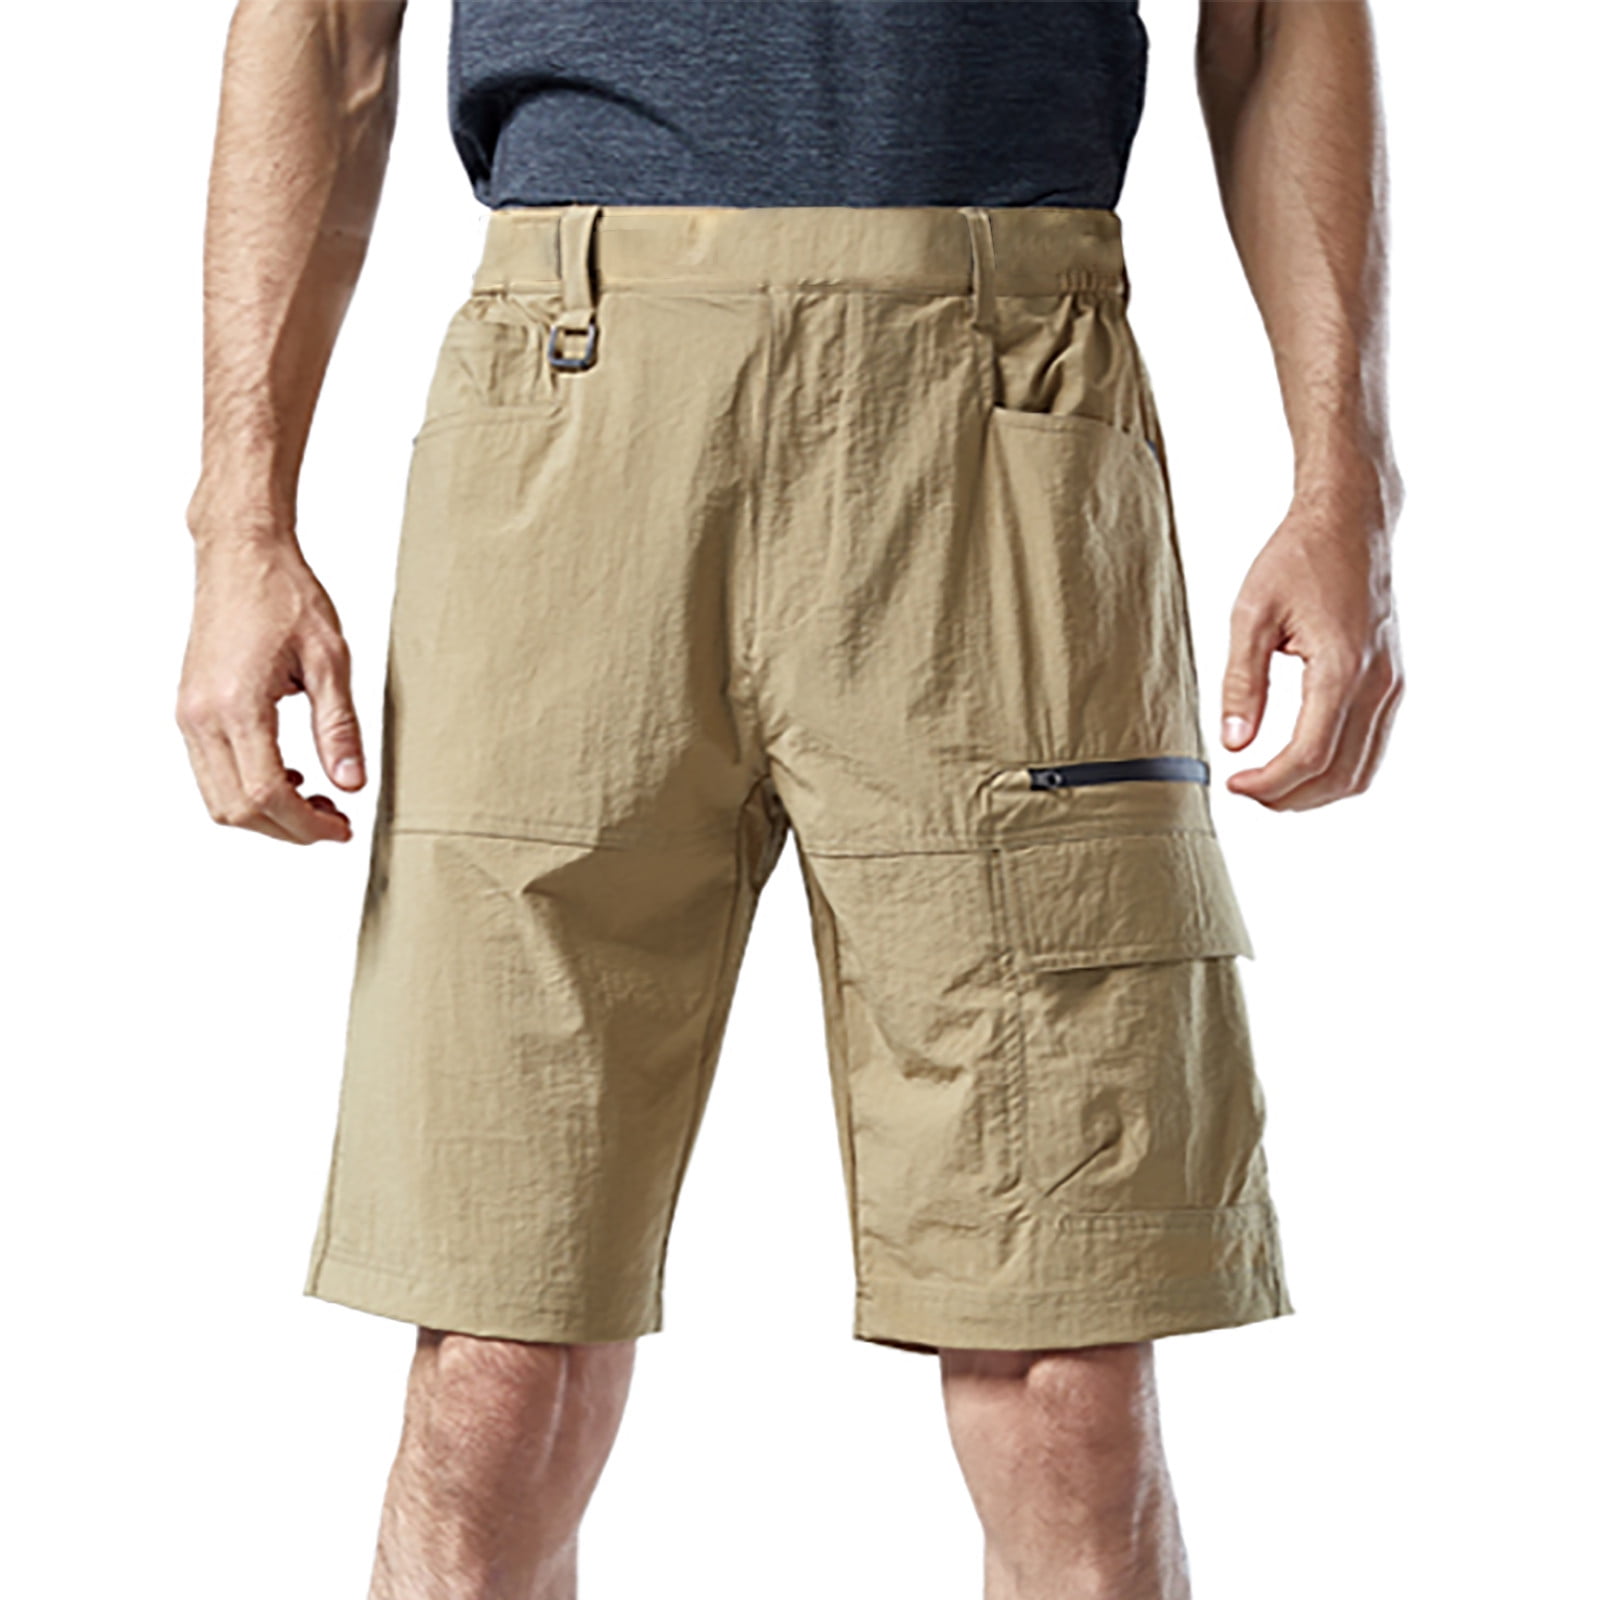 Starnp Half Pant - Send Gifts and Money to Nepal Online from www.muncha.com